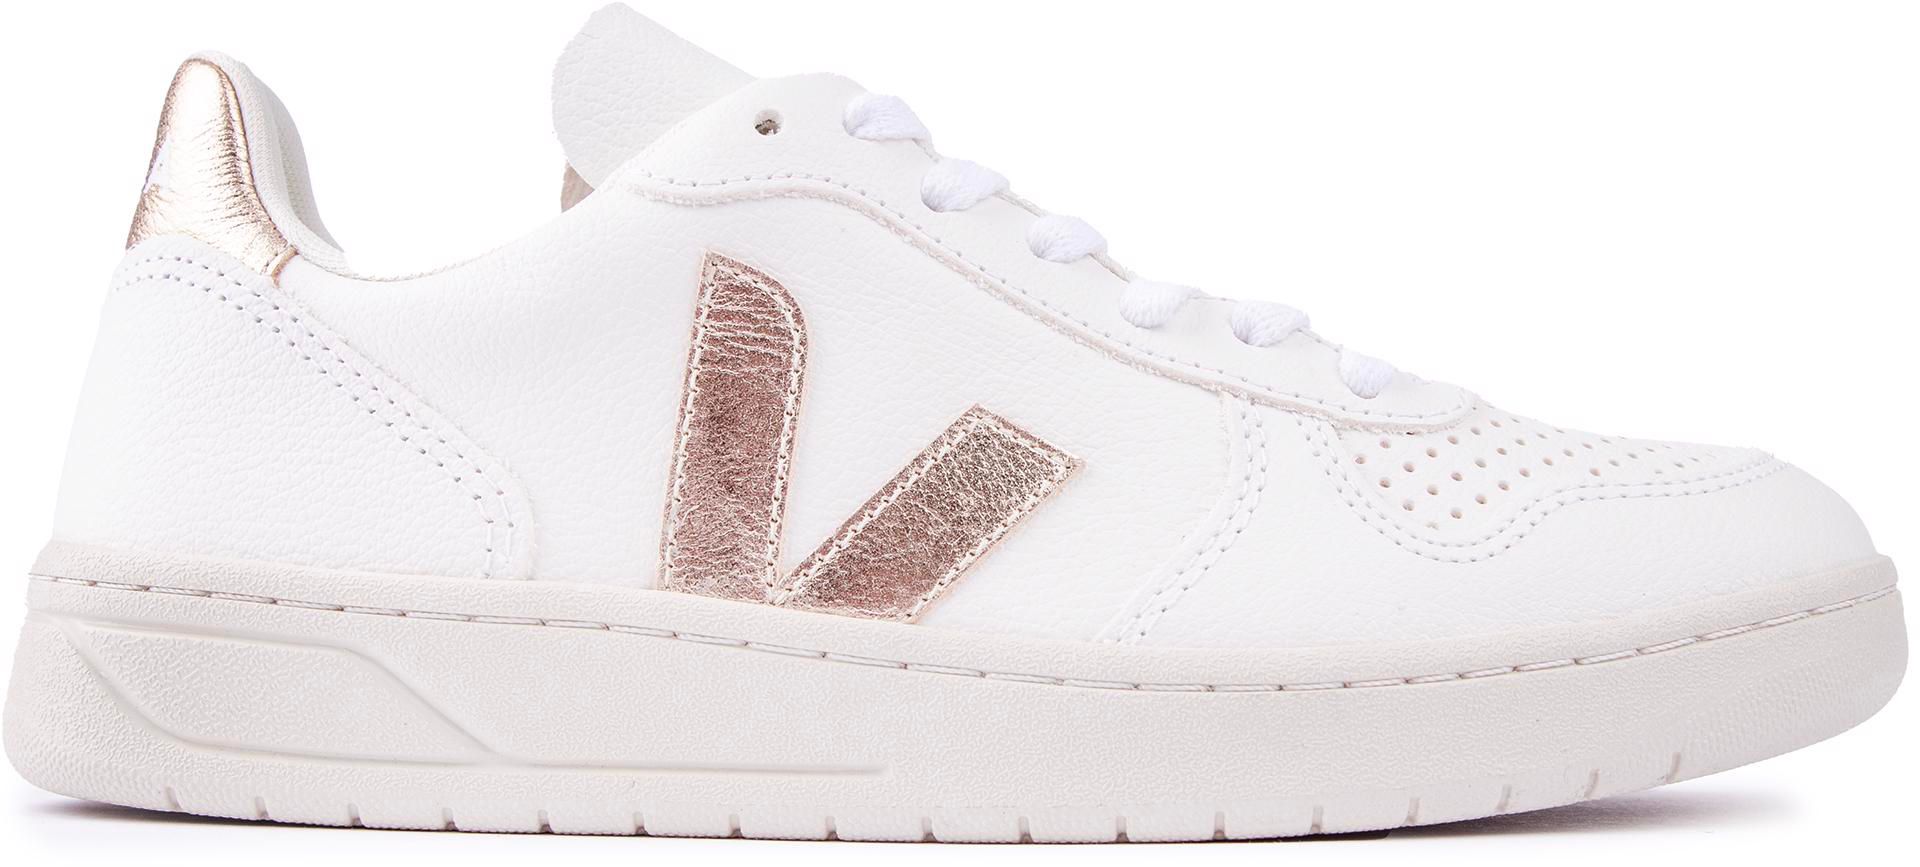 Womens Veja V10 Leather Sneakers In White/Platine | Soletrader